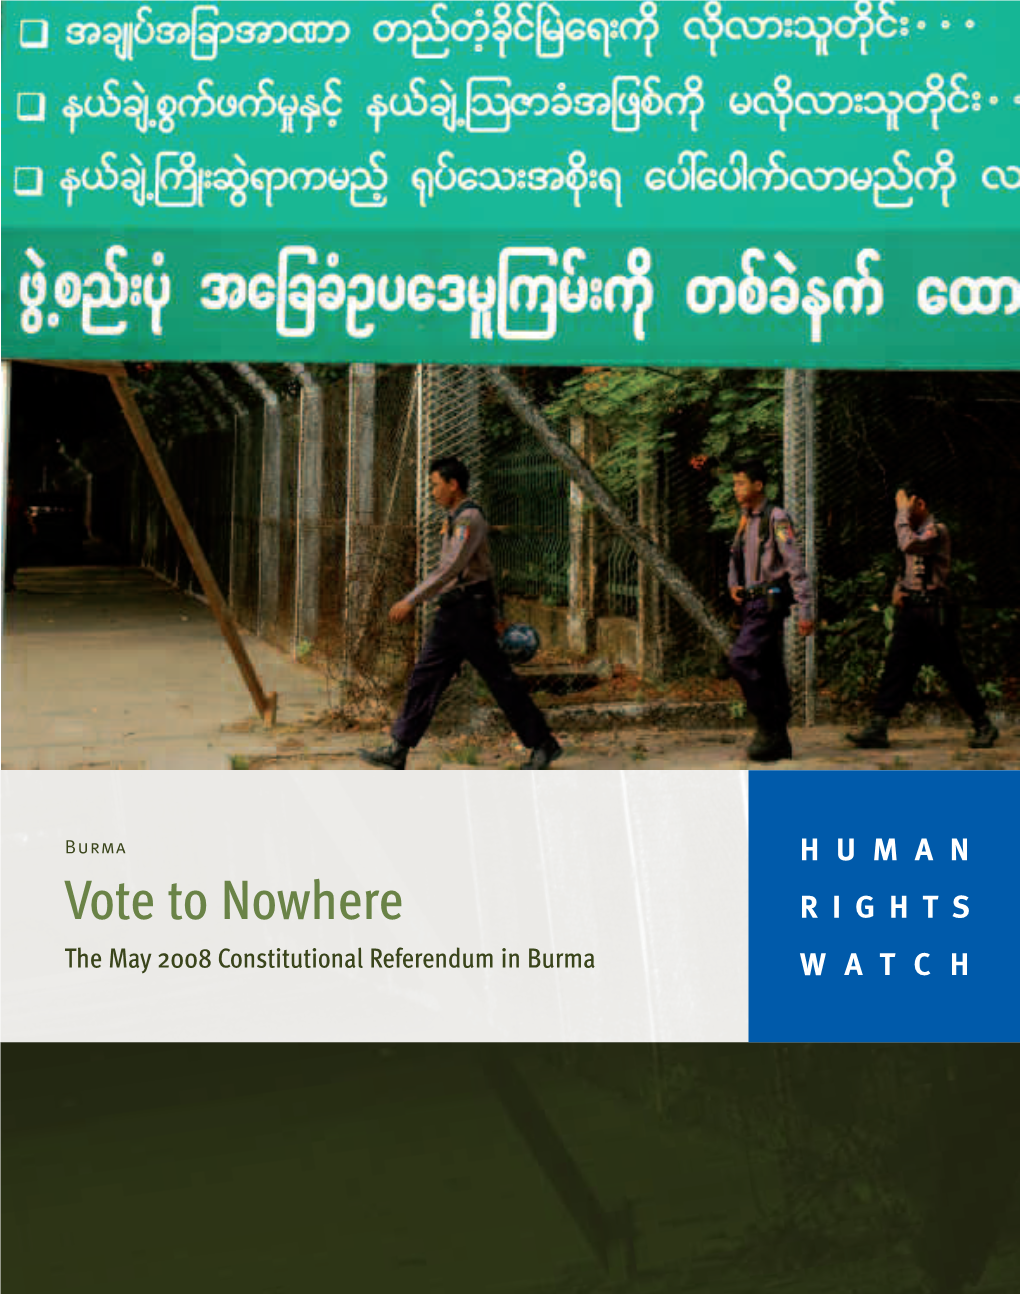 The May 2008 Constitutional Referendum in Burma WATCH